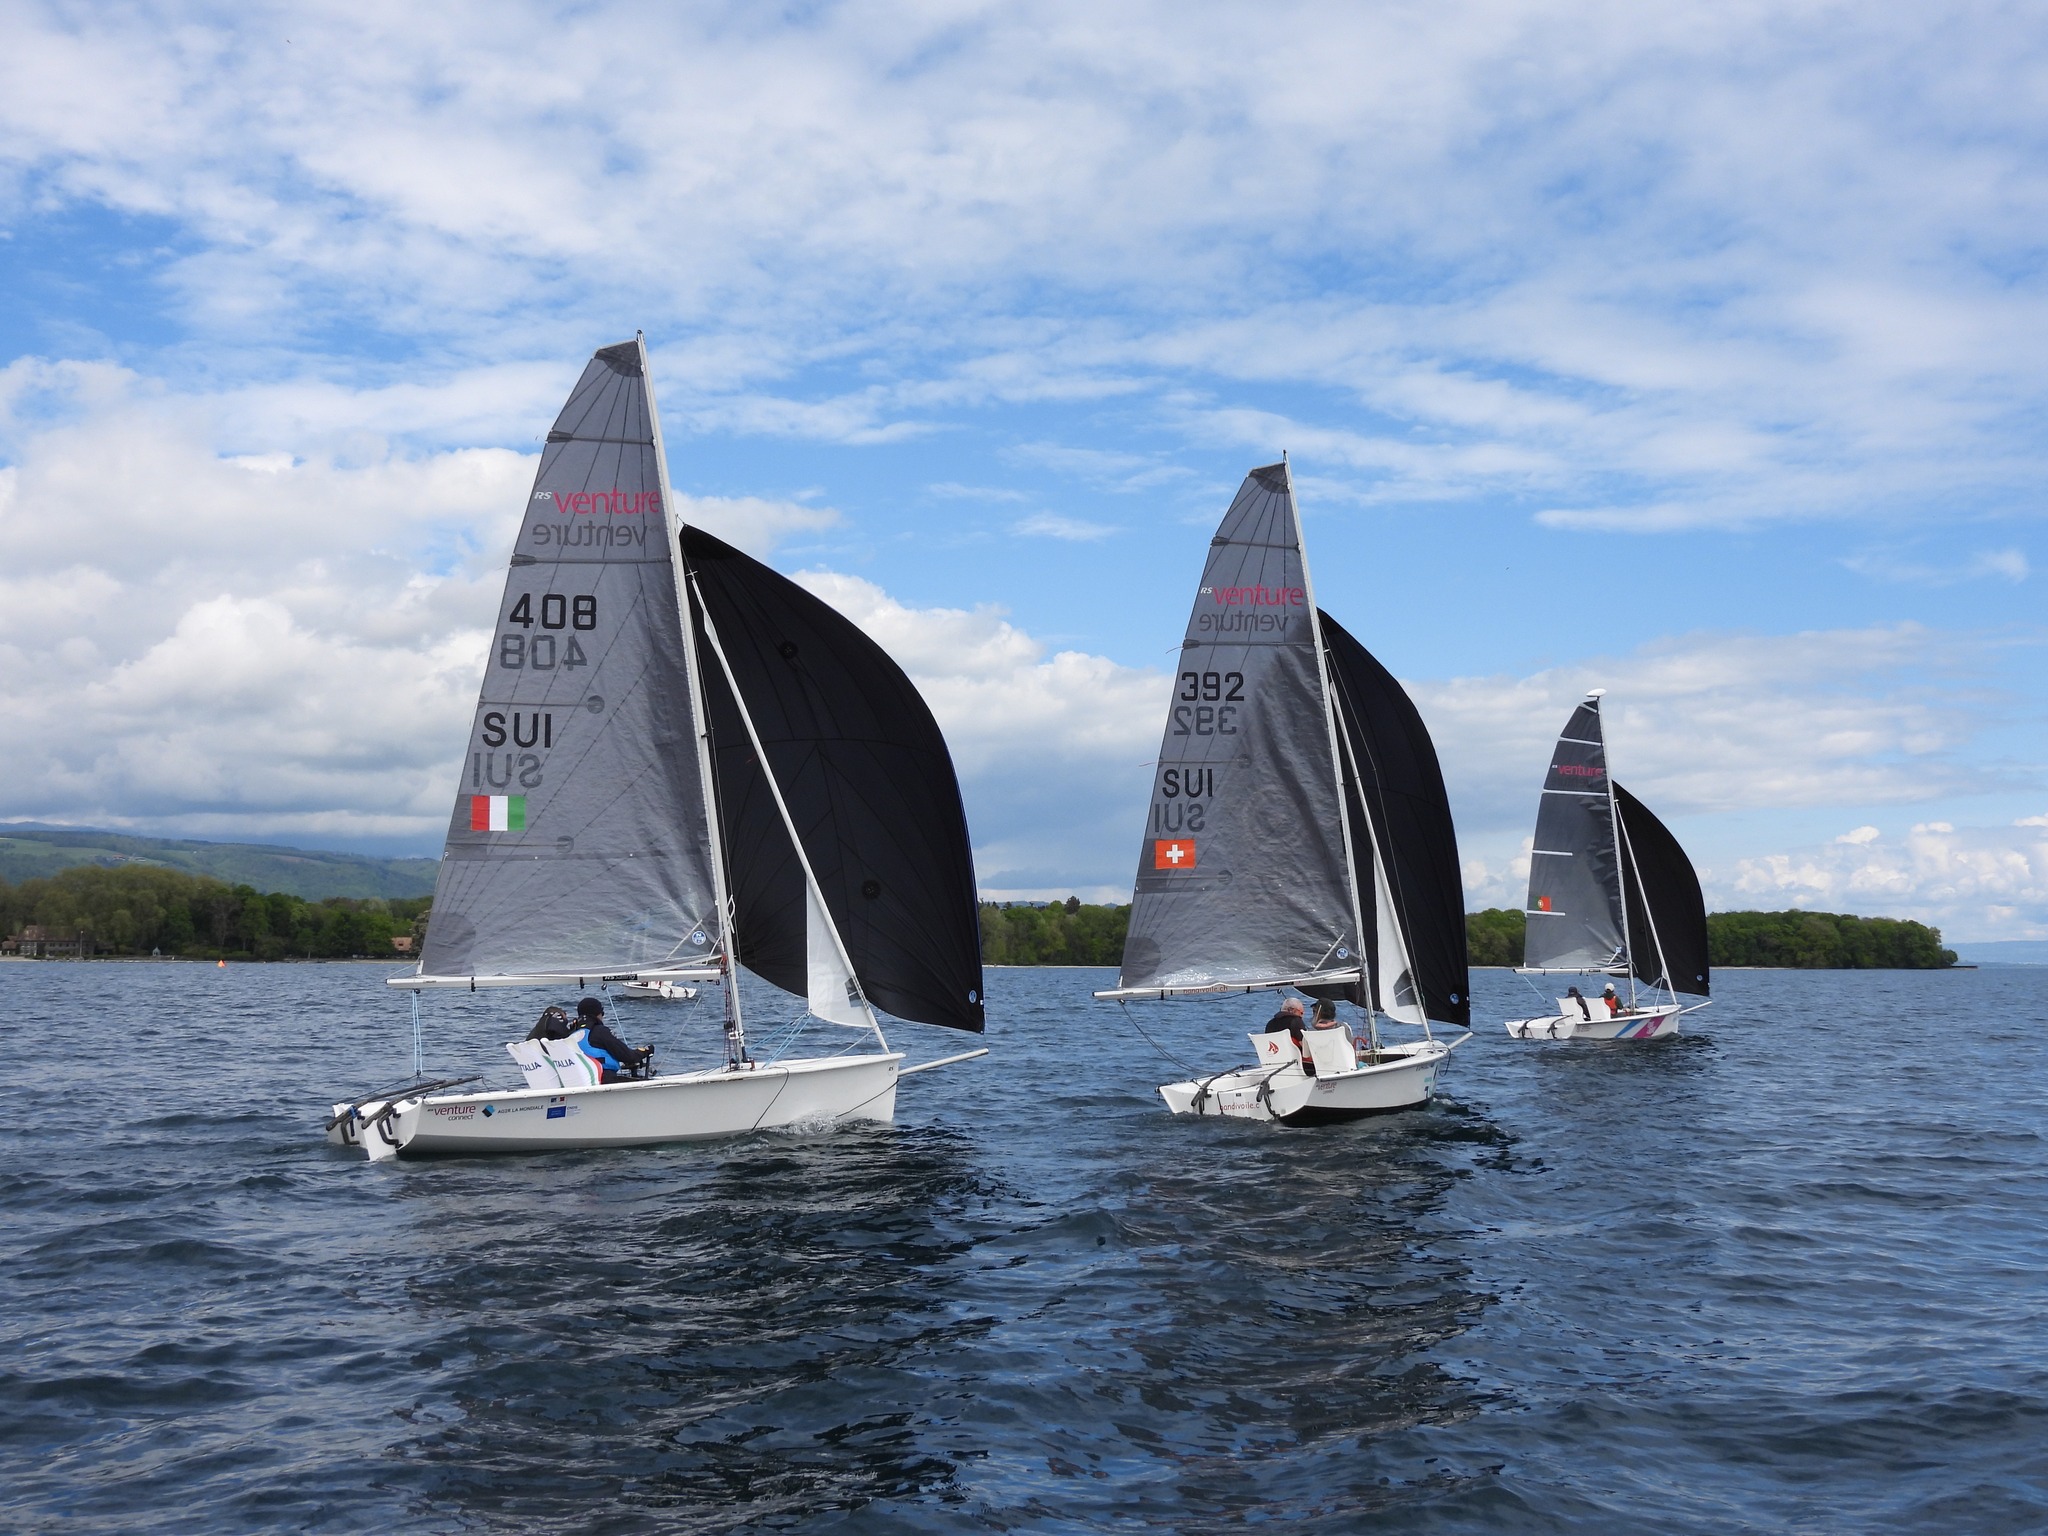  RS Venture - Swiss Inclusive Cup - CV Prangins - Day 2